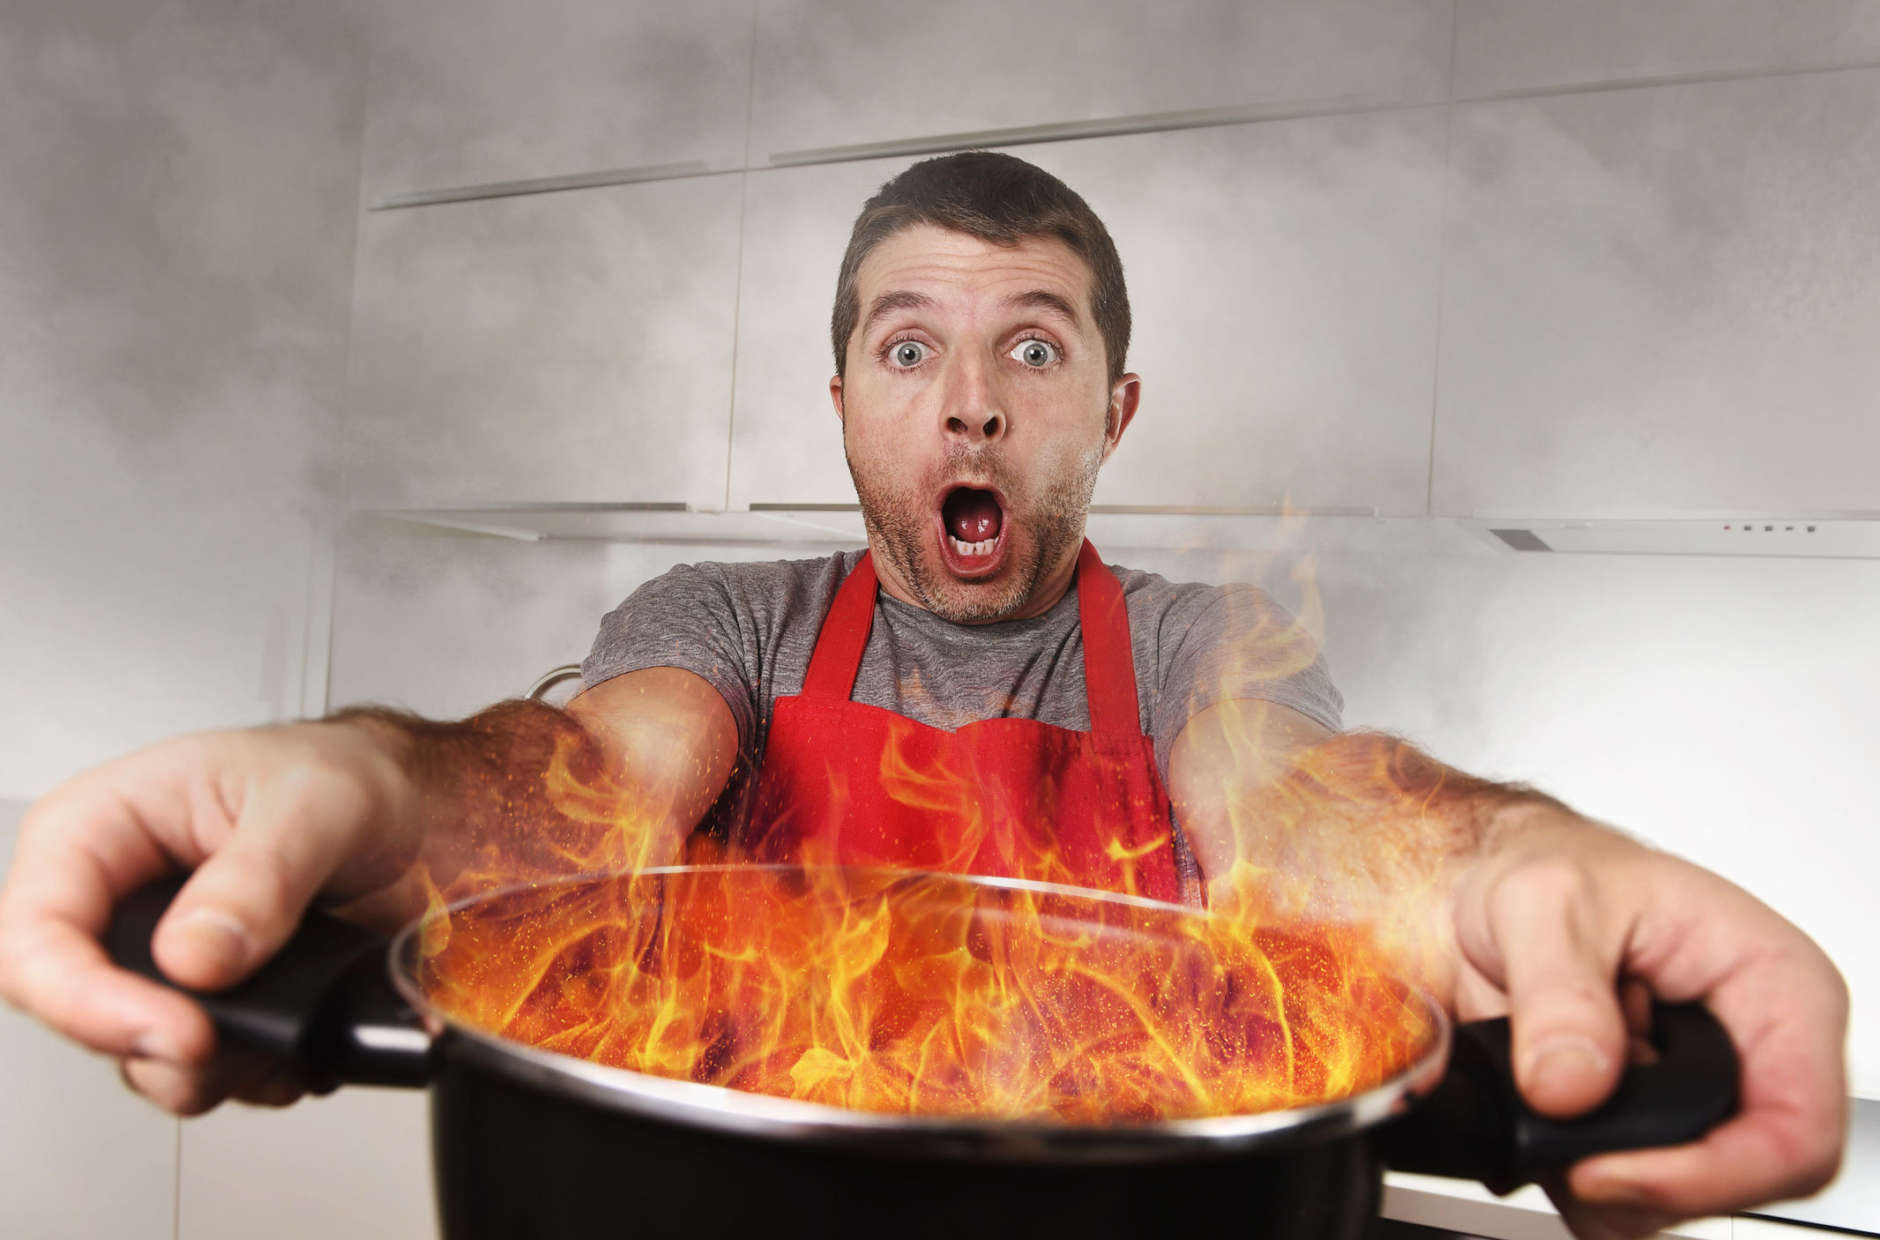 young inexperienced home cook with apron holding pot burning in flames with stress and panic face expression in fire in the kitchen and cooking wrong concept